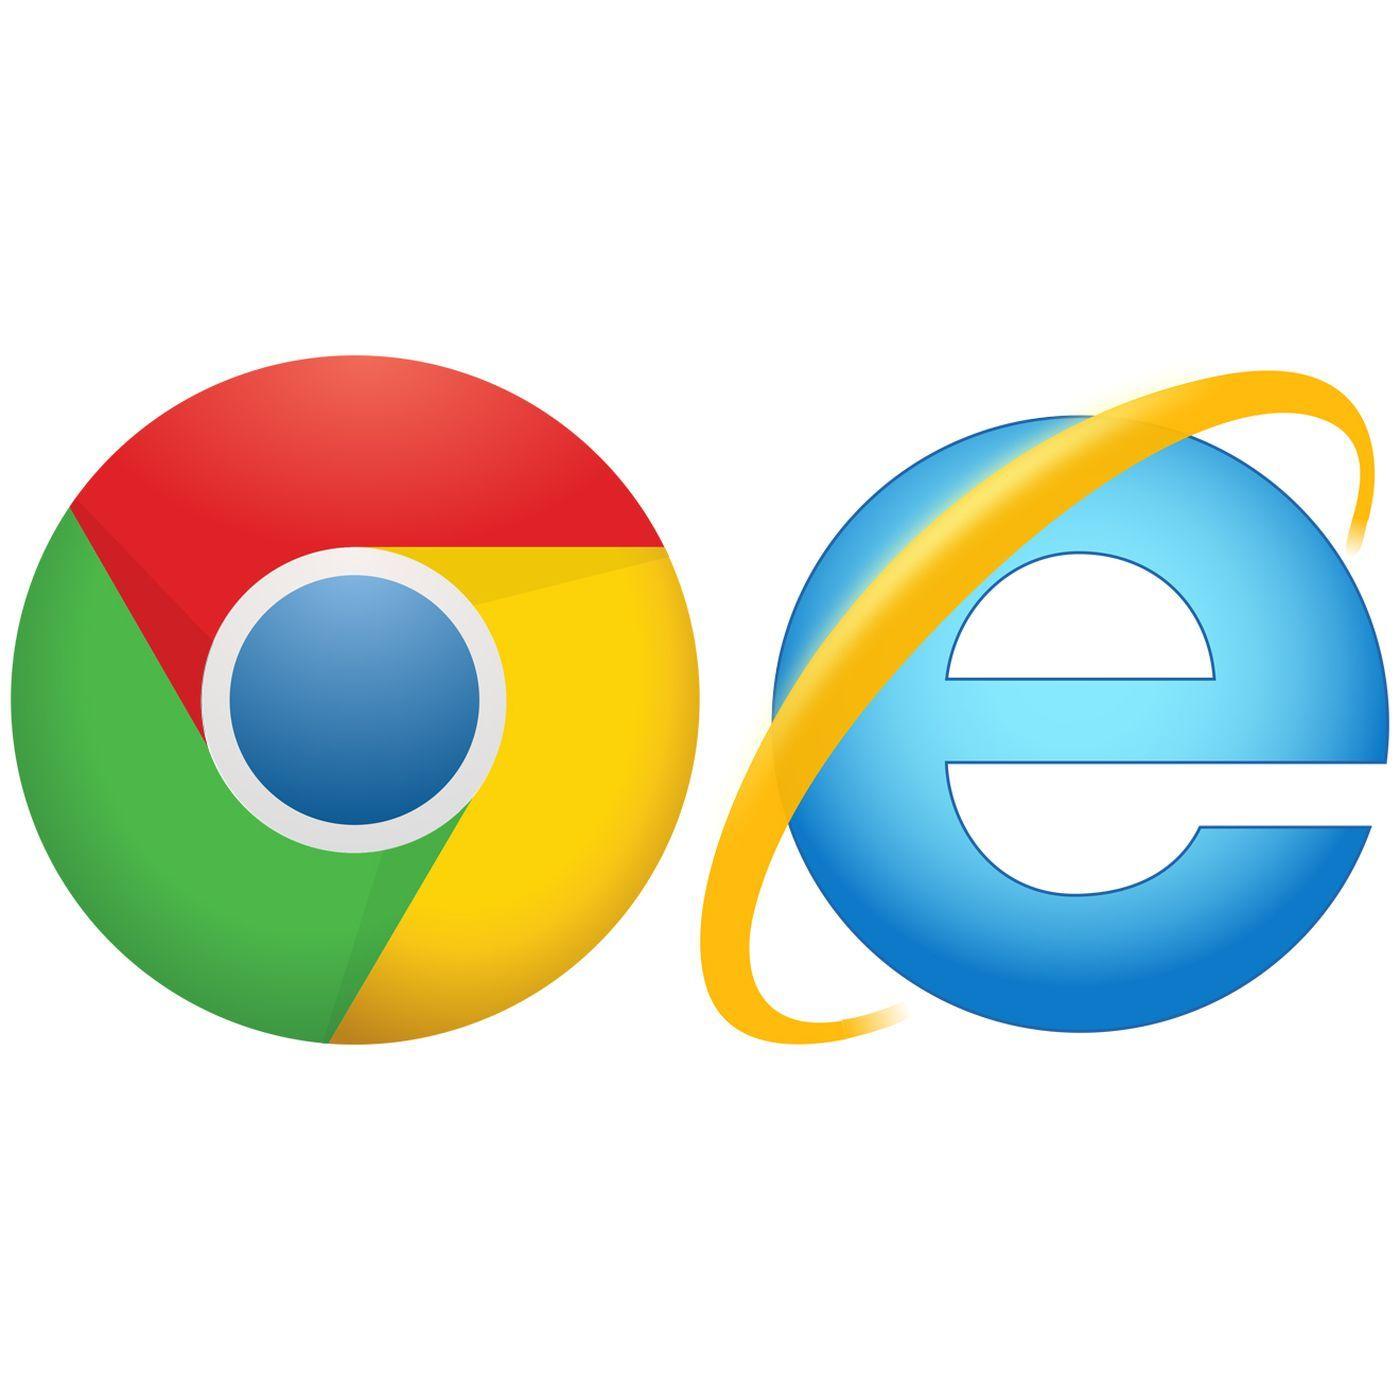 IE6 Logo - Chrome is turning into the new Internet Explorer 6 - The Verge